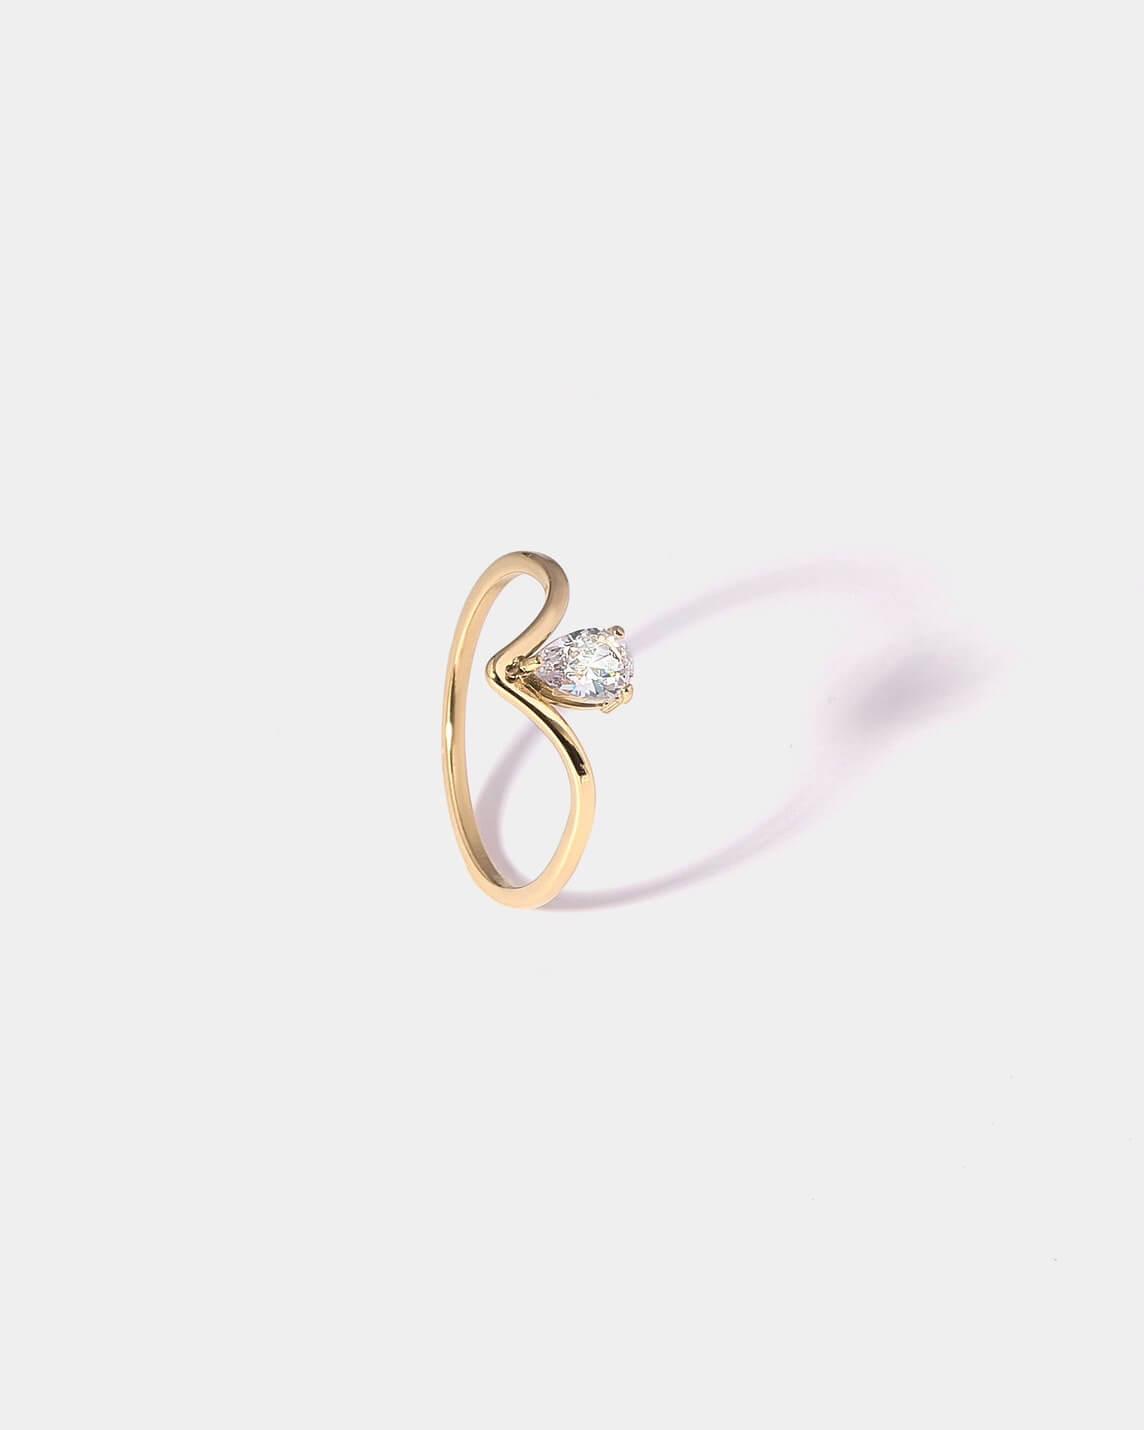 DEWDROP ZIRCON RING - THE LIMELY